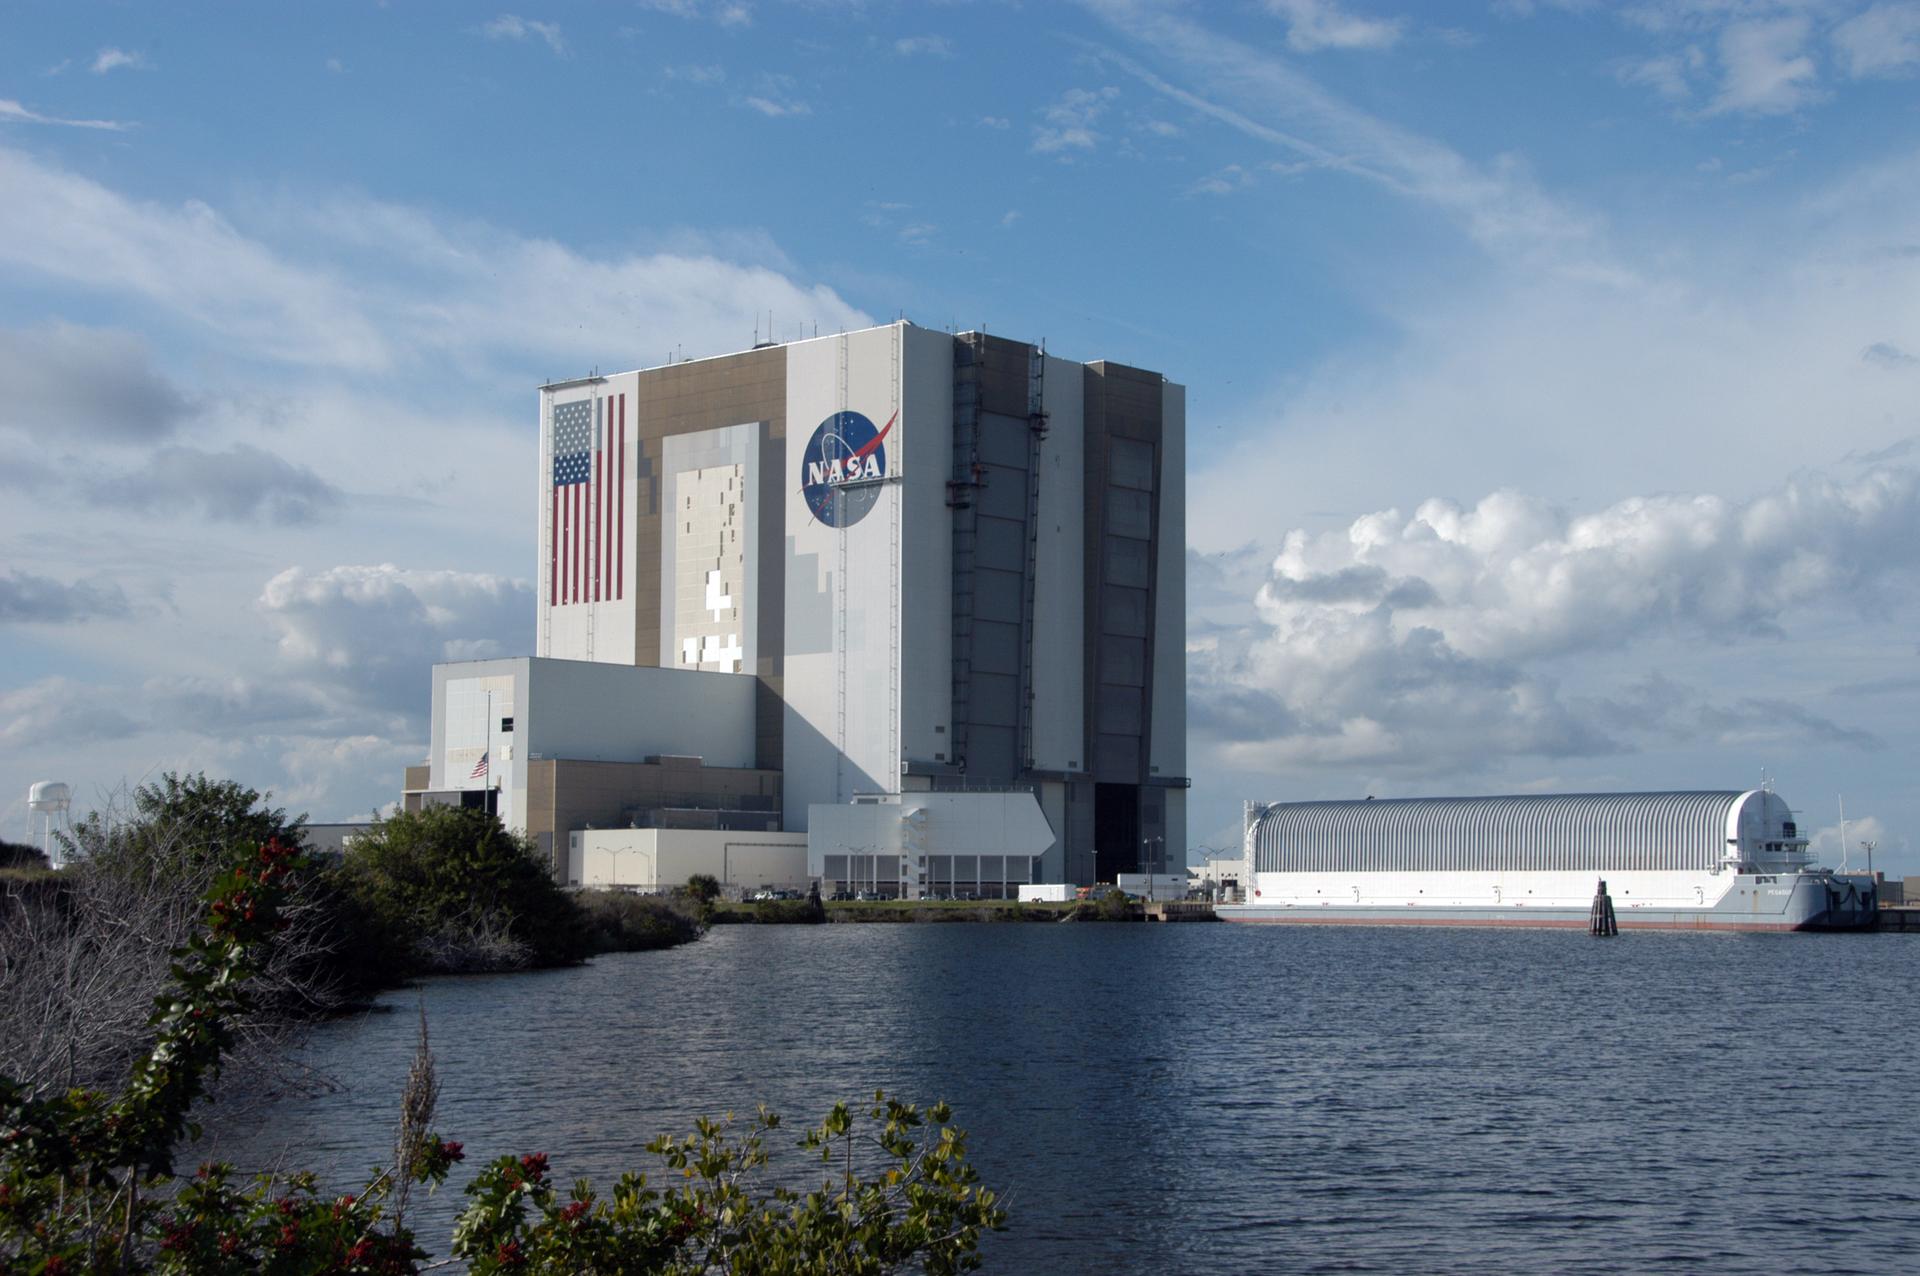 The Vehicle Assembly Building at Nasa’s Kennedy Space Center in Florida